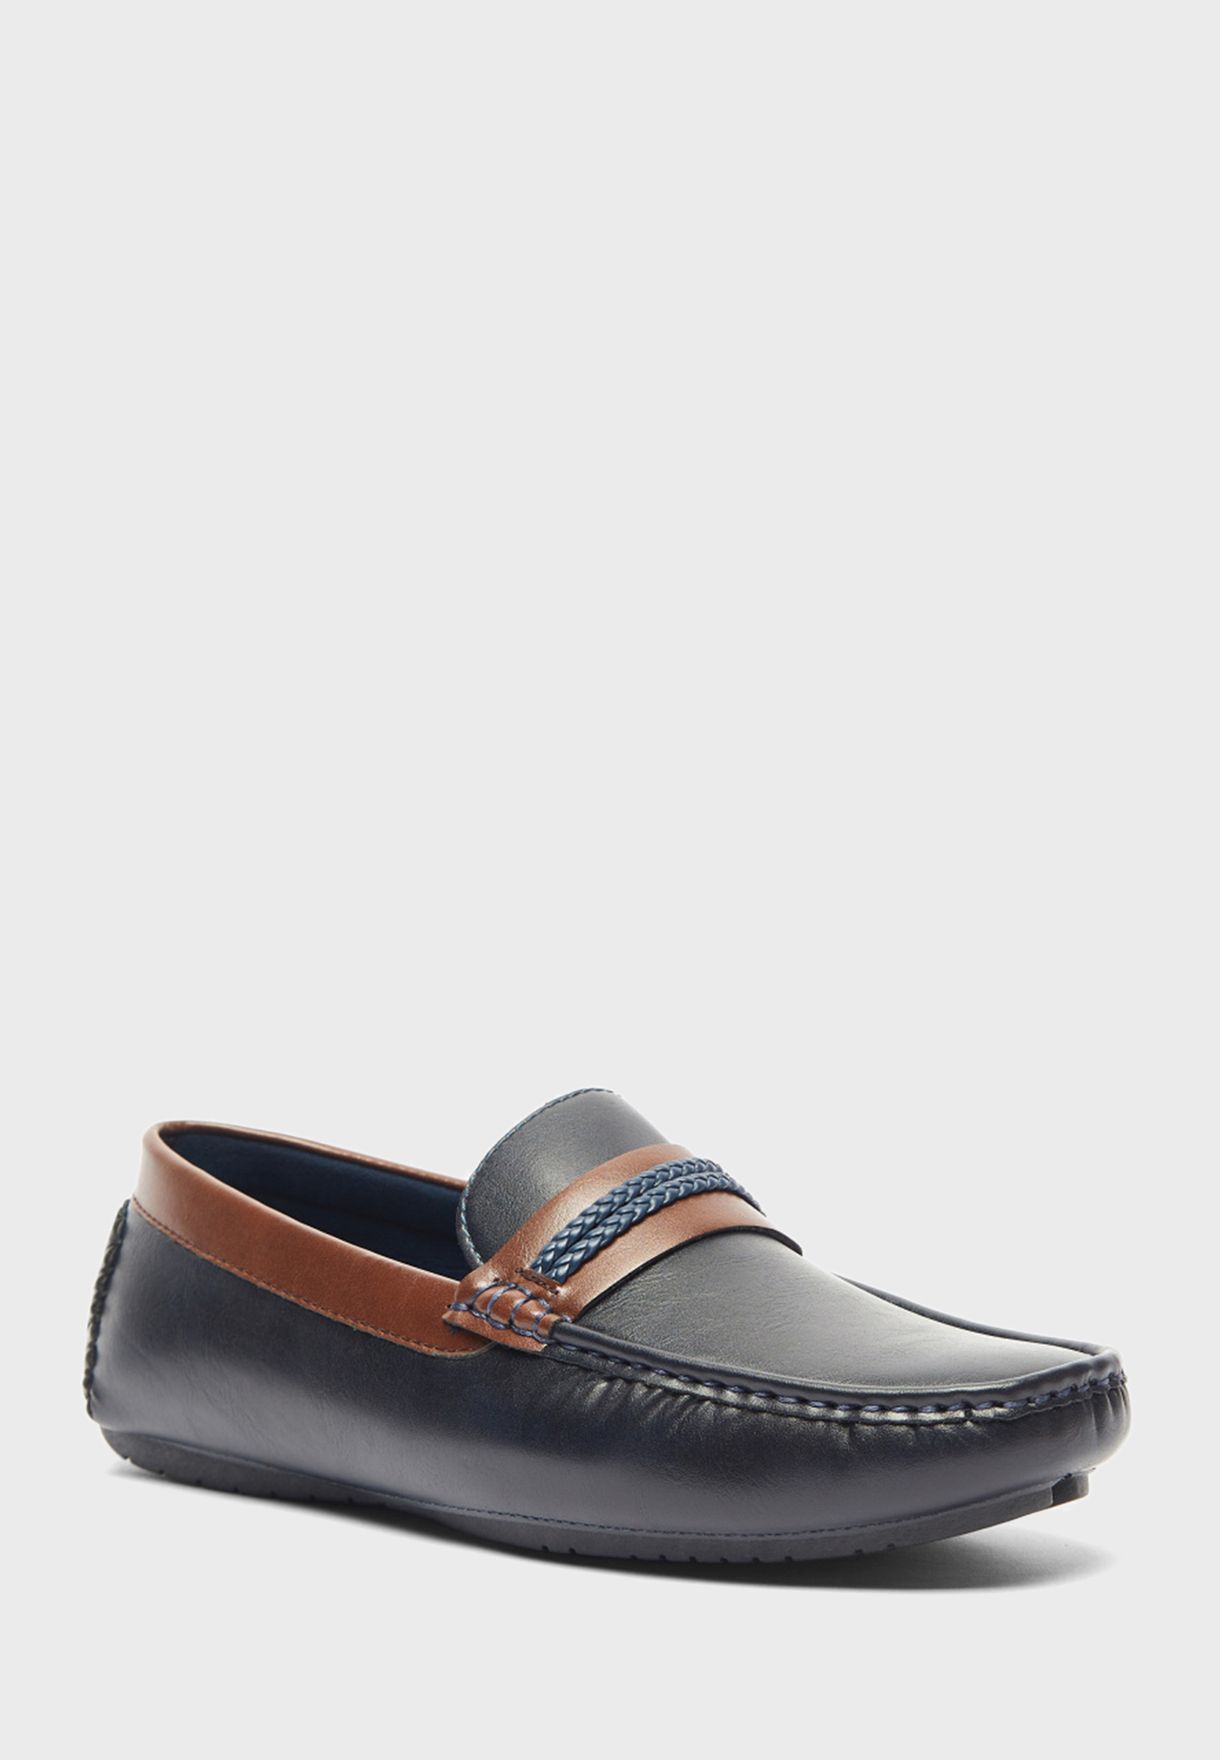 S222-Mcs-Ss-02 Slip On Loafers